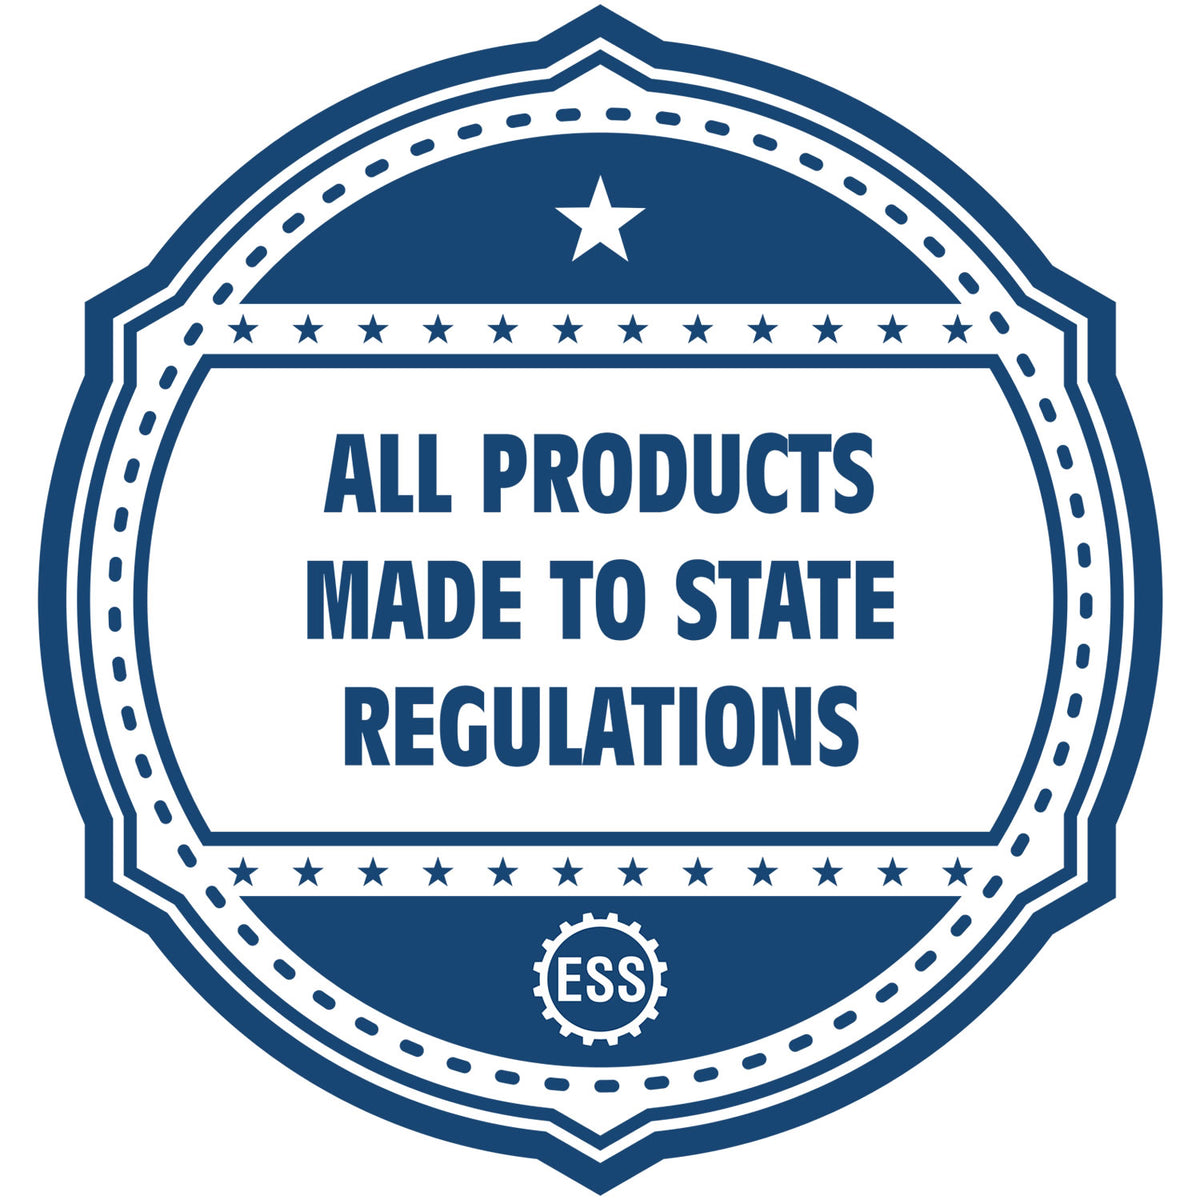 An icon or badge element for the Soft Pocket South Dakota Landscape Architect Embosser showing that this product is made in compliance with state regulations.